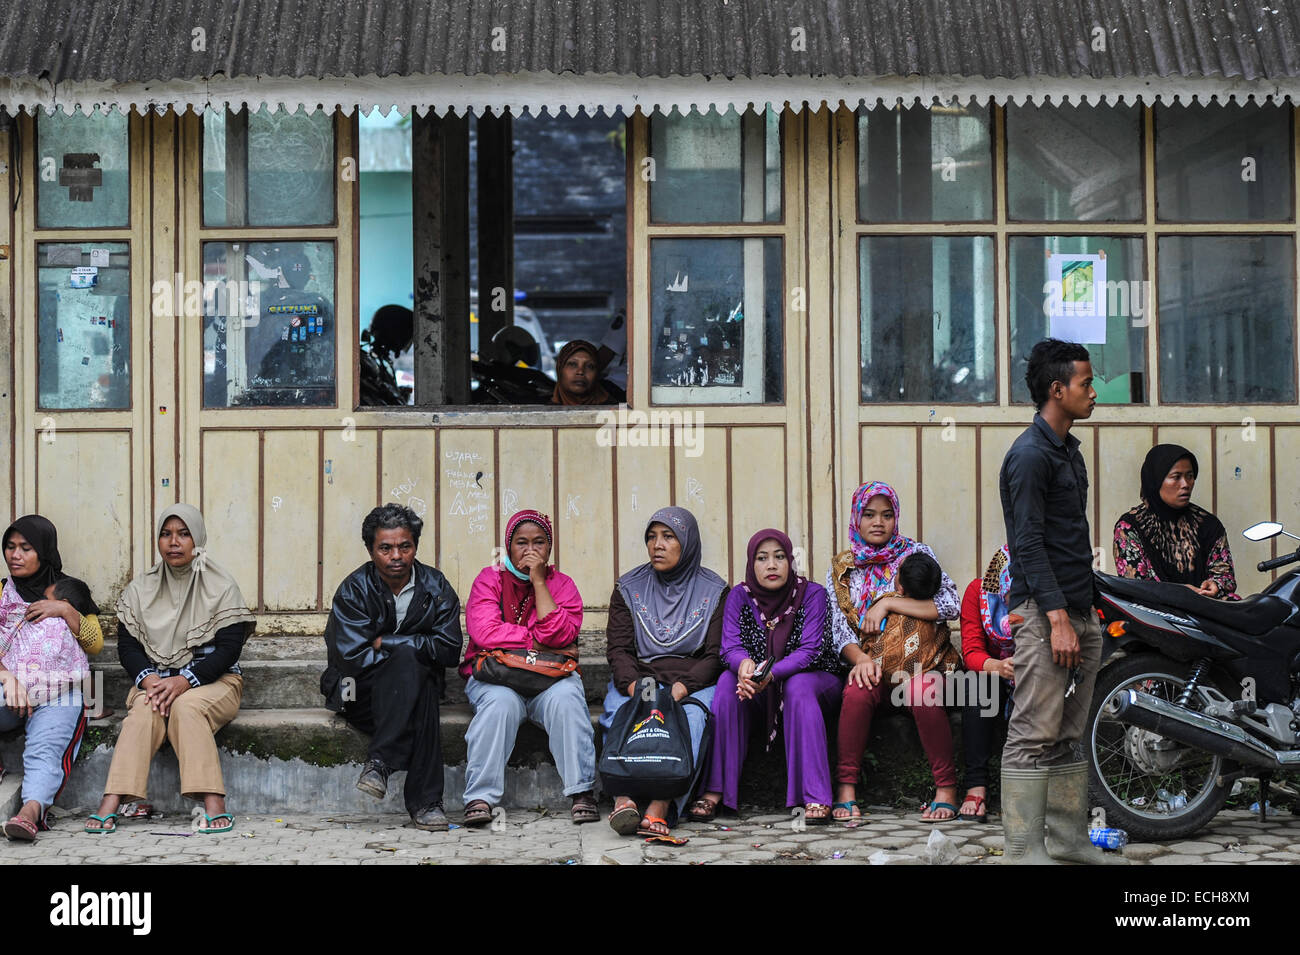 Banjarnegara. 15th Dec, 2014. Relatives of victims of landslide wait for new information at the Karangkobar health centre in Indonesia, Dec. 15, 2014. A landslide hitting the village of Sampang in Banjarnegara of Indonesia on Friday has buried hundreds of people including local residents and visitors. Rescuers have found 47 bodies in the location up to Dec. 15. Credit:  Veri Sanovri/Xinhua/Alamy Live News Stock Photo